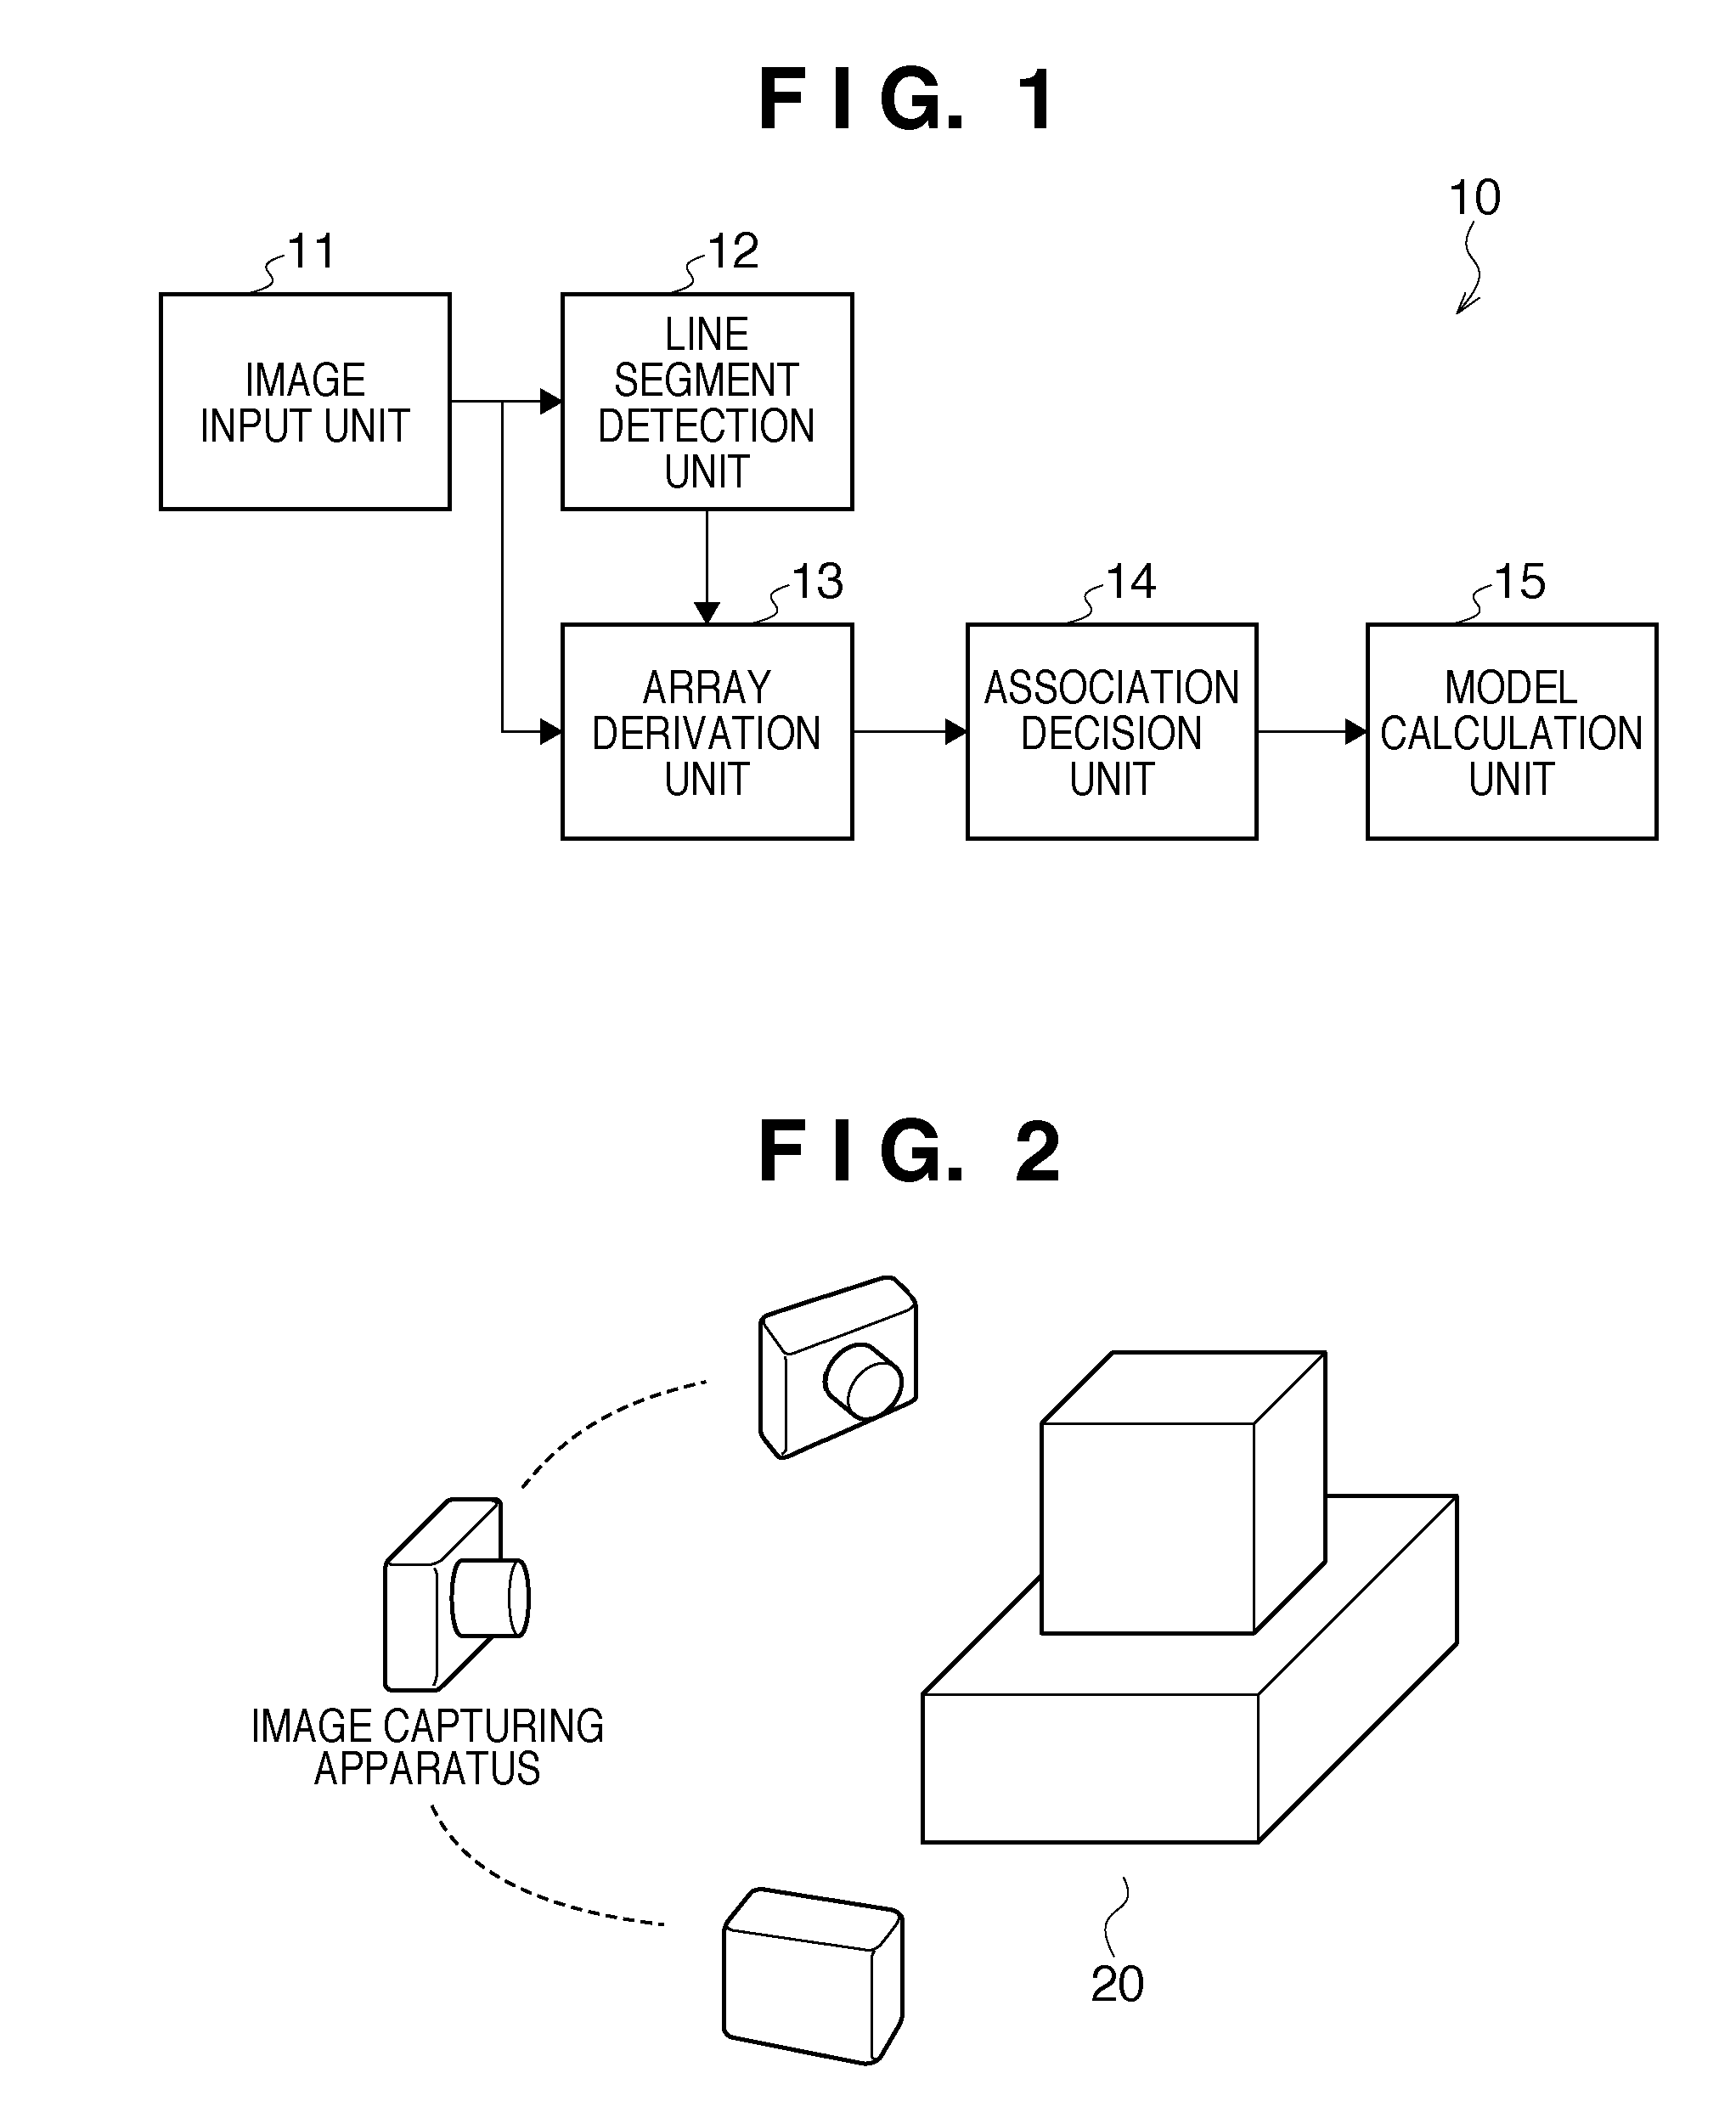 Image processing apparatus, processing method therefor, and non-transitory computer-readable storage medium